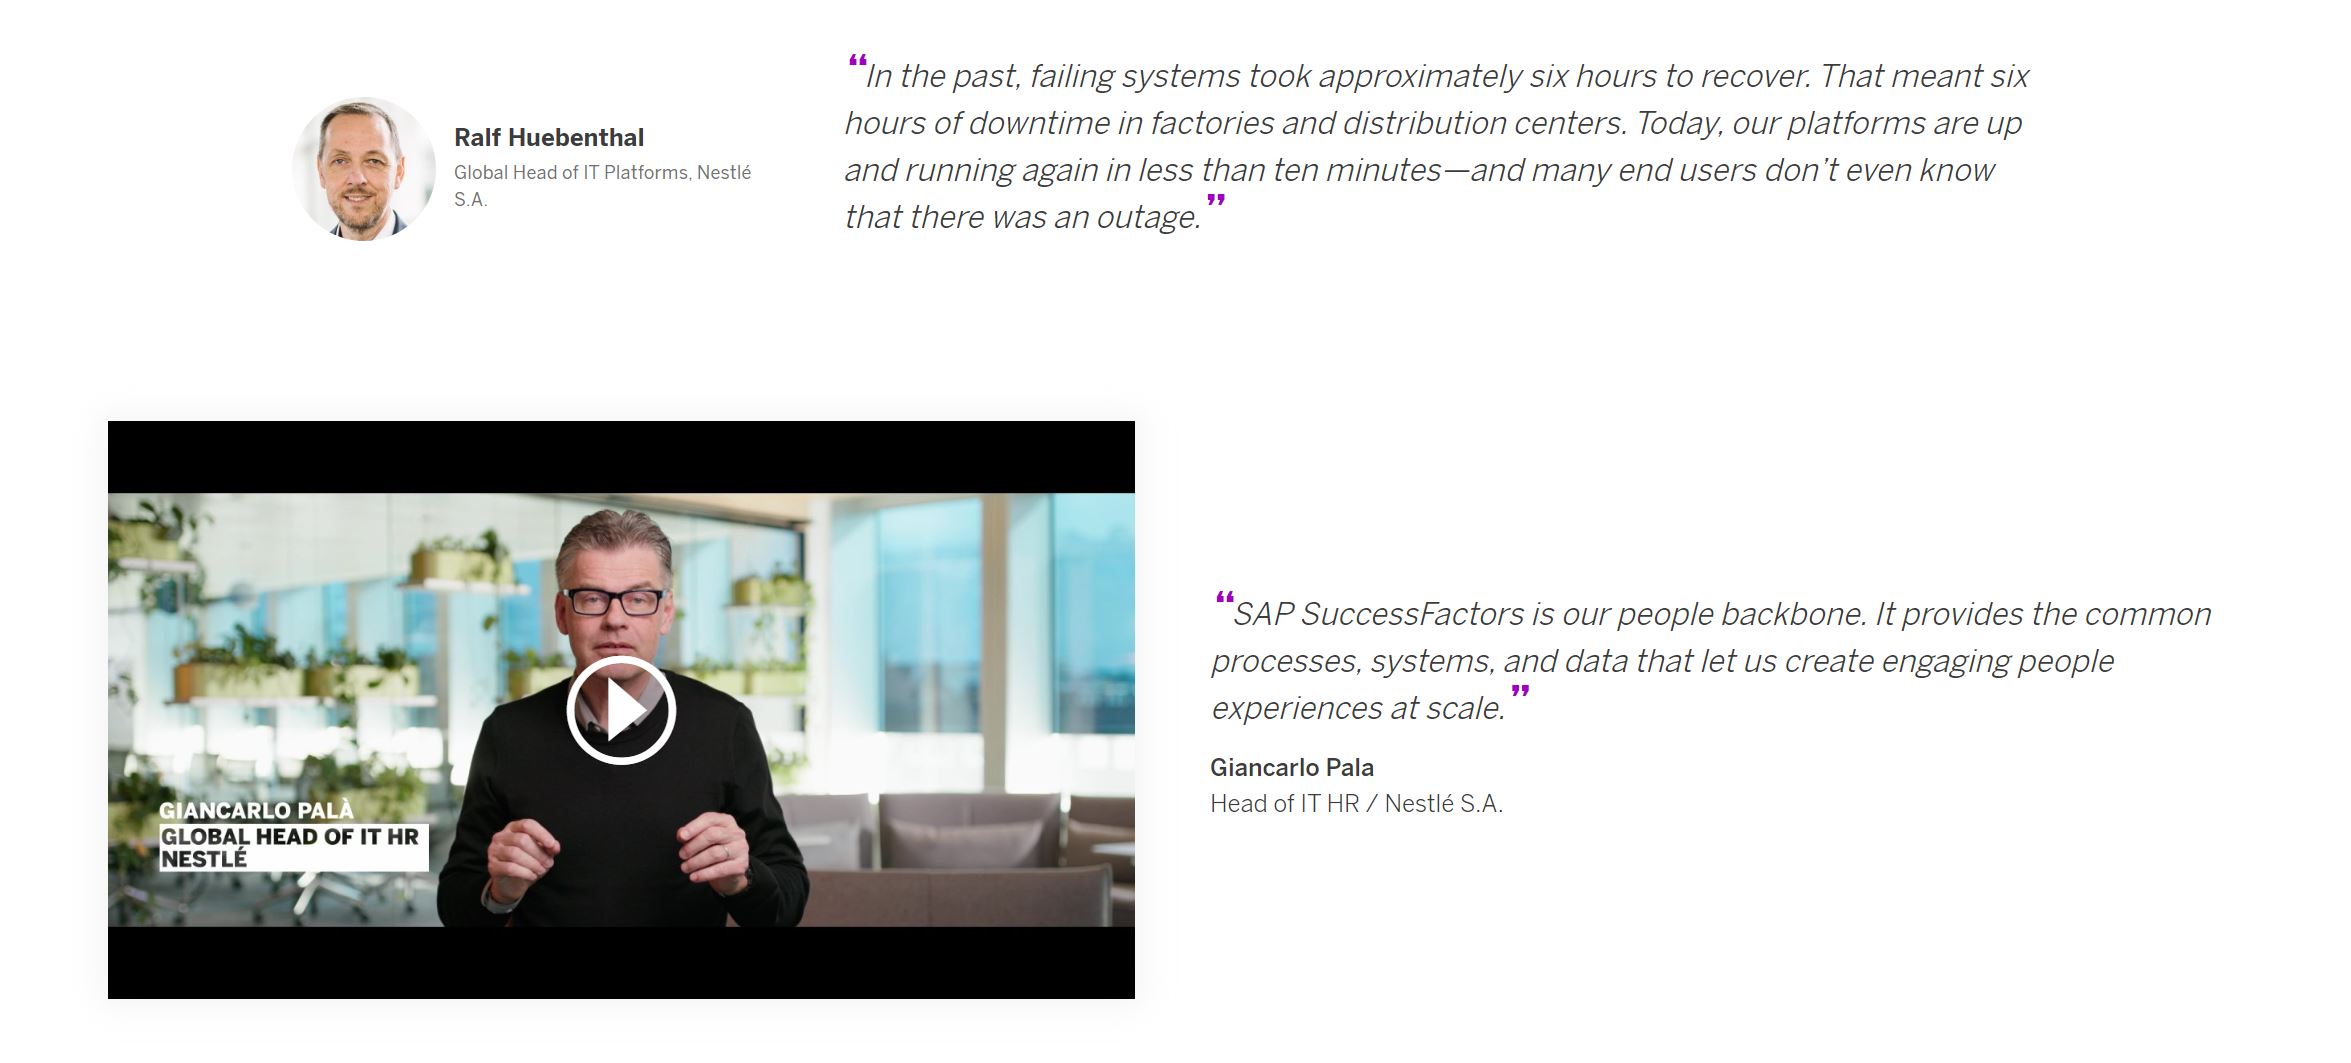 A screen capture from an SAP case study shows how video and client testimonials add interest.